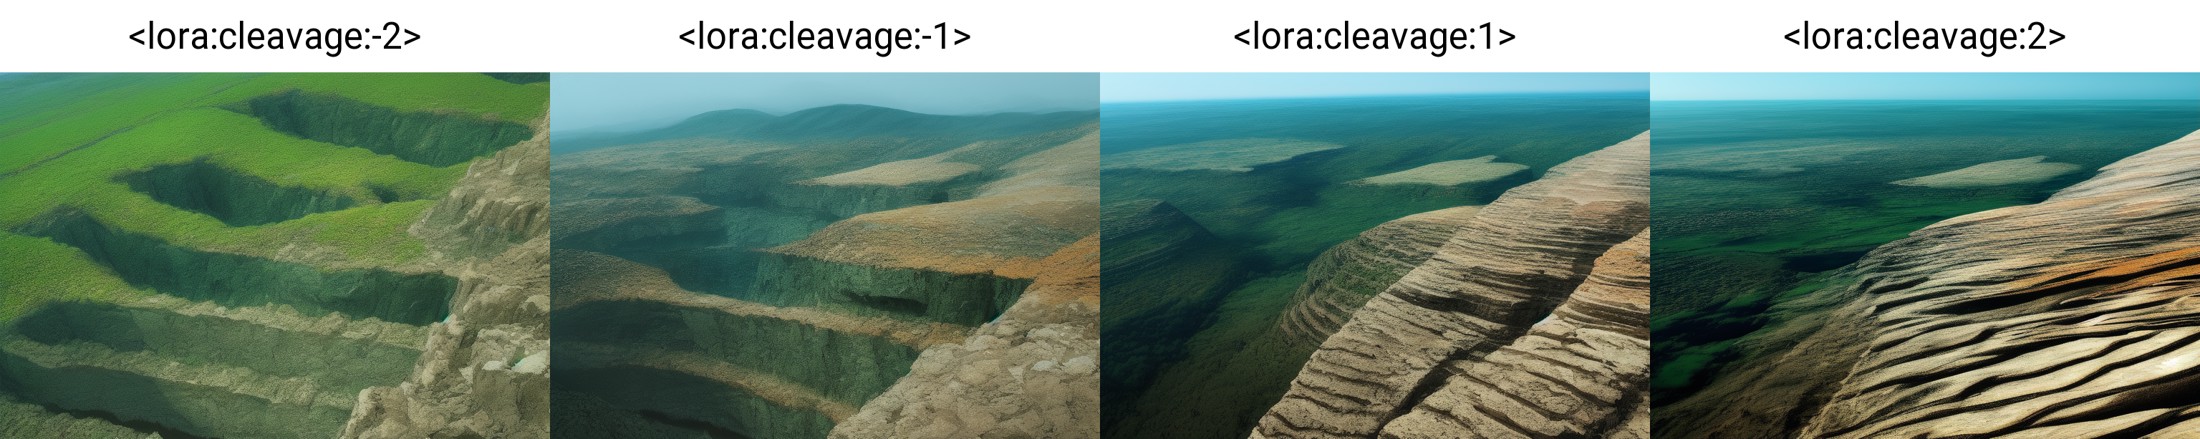 <lora:cleavage:-2>, cleavage, landscape, no_humans, sedimentary, diagenetic foliation